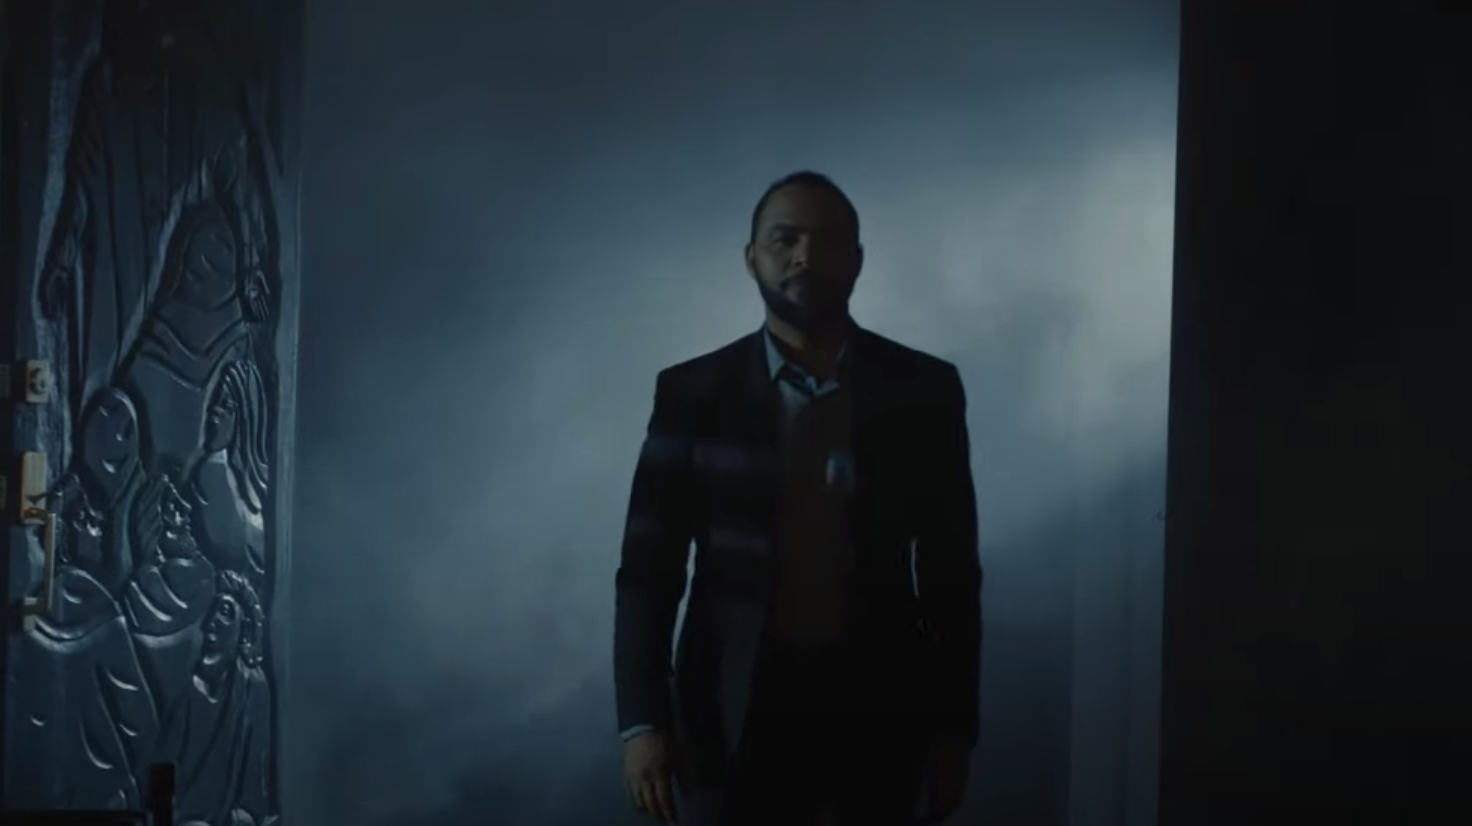 This is Ramsey Nouah as the villain in what movie?